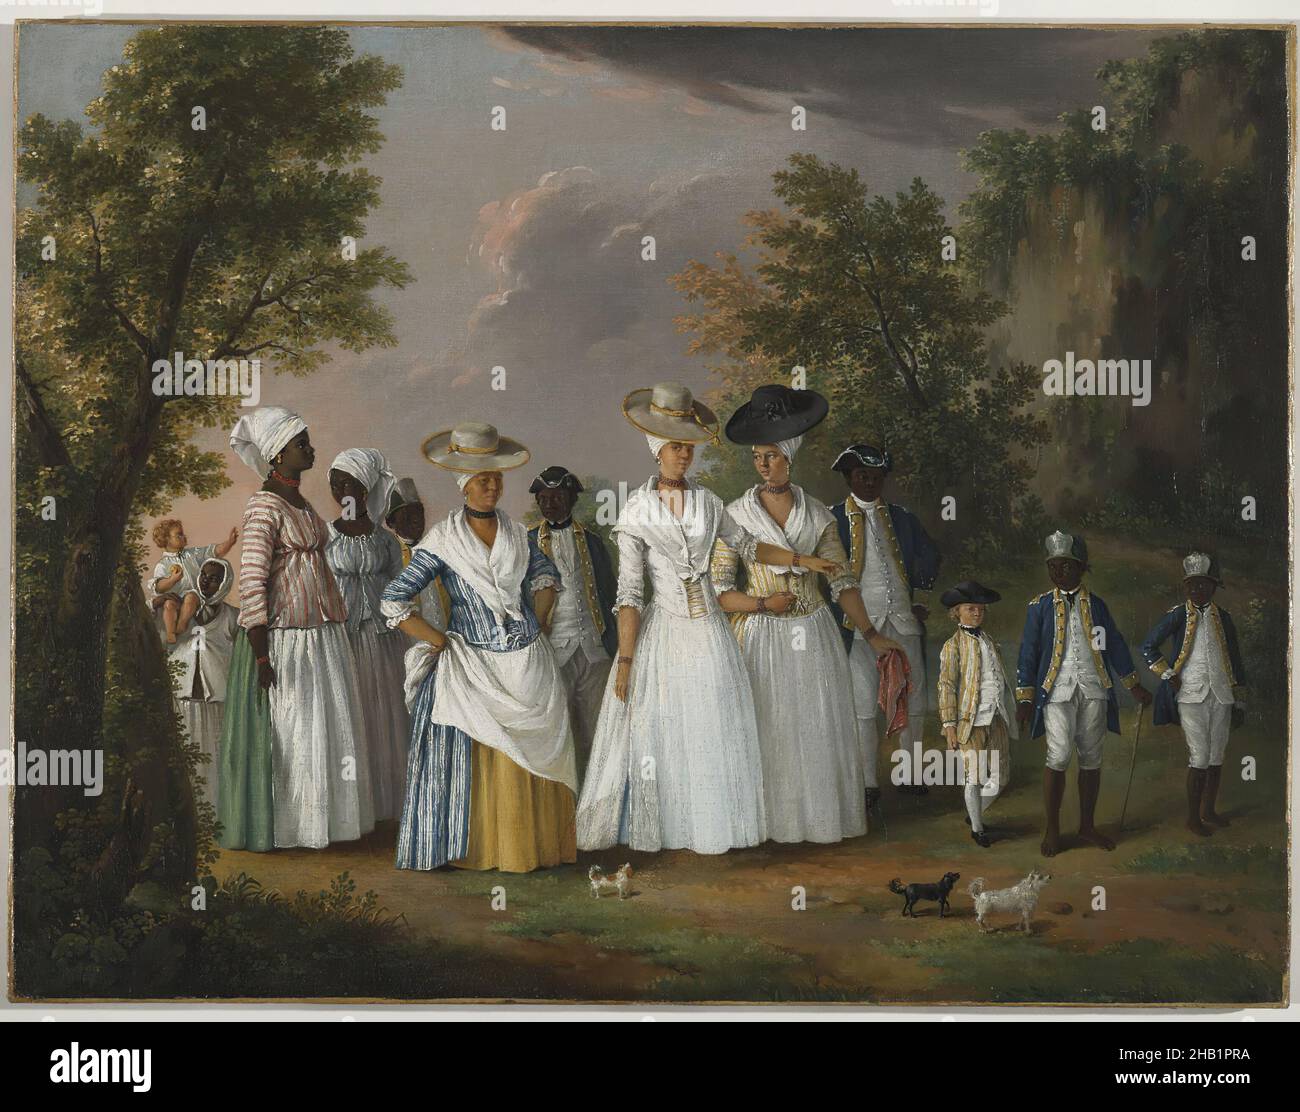 Free Women of Color with Their Children and Servants in a Landscape, Agostino Brunias, Italian, ca. 1730-1796, Oil on canvas, ca. 1770-1796, 20 x 26 1/8 in., 50.8 x 66.4 cm, 18thC, aprons, attendants, black women, chokers, colonialism, colonialsim, Dog, dresses, earrings, emancipation, fichu, hats, head gear, head scarf, jewelry, kerchief, lower class, necklace, race relations, scarf, scarves, skin color, slavery, social hierarchy, Society, status, upper class, wealth, white women, women Stock Photo